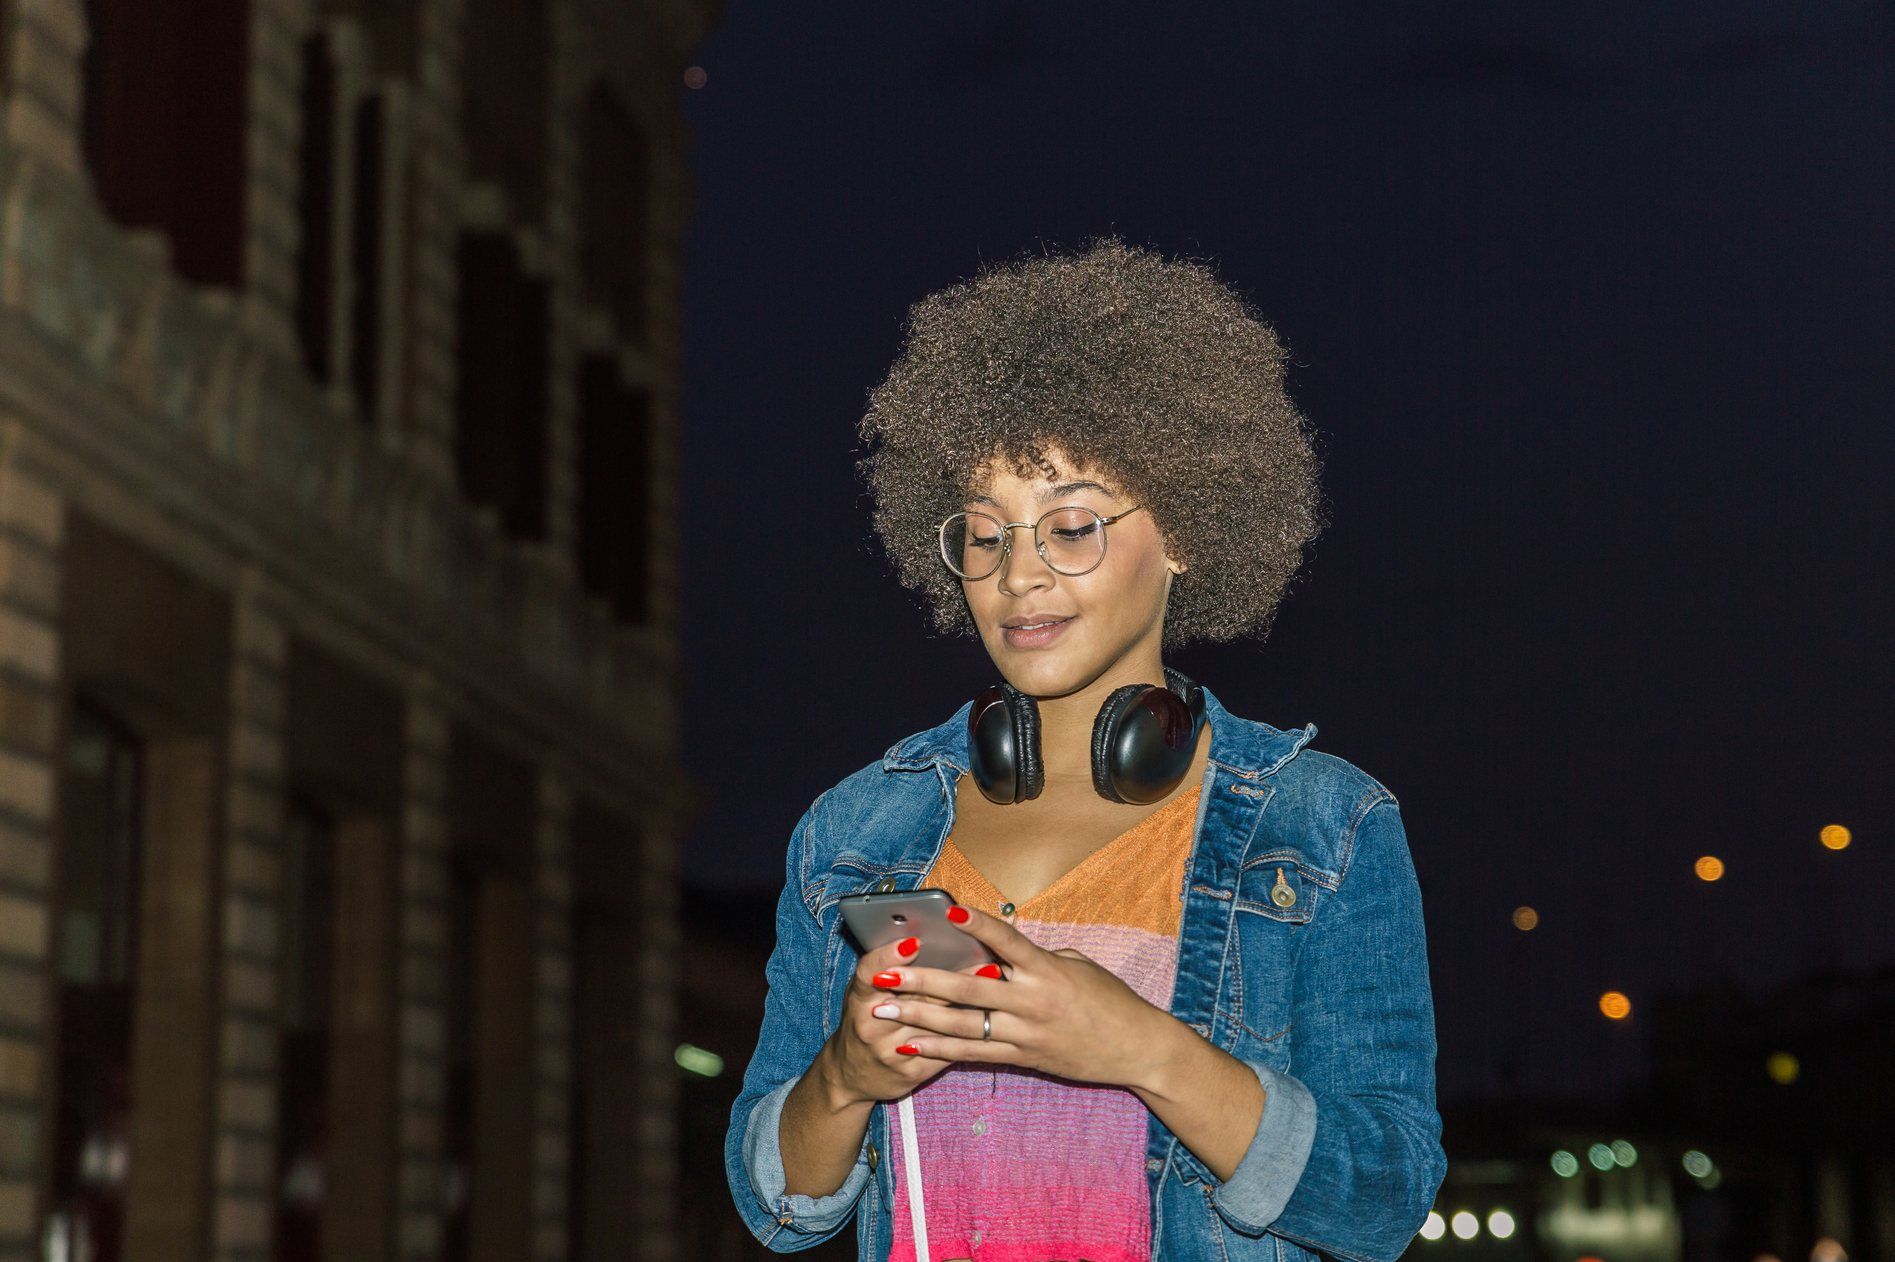 Young woman texts outside at night